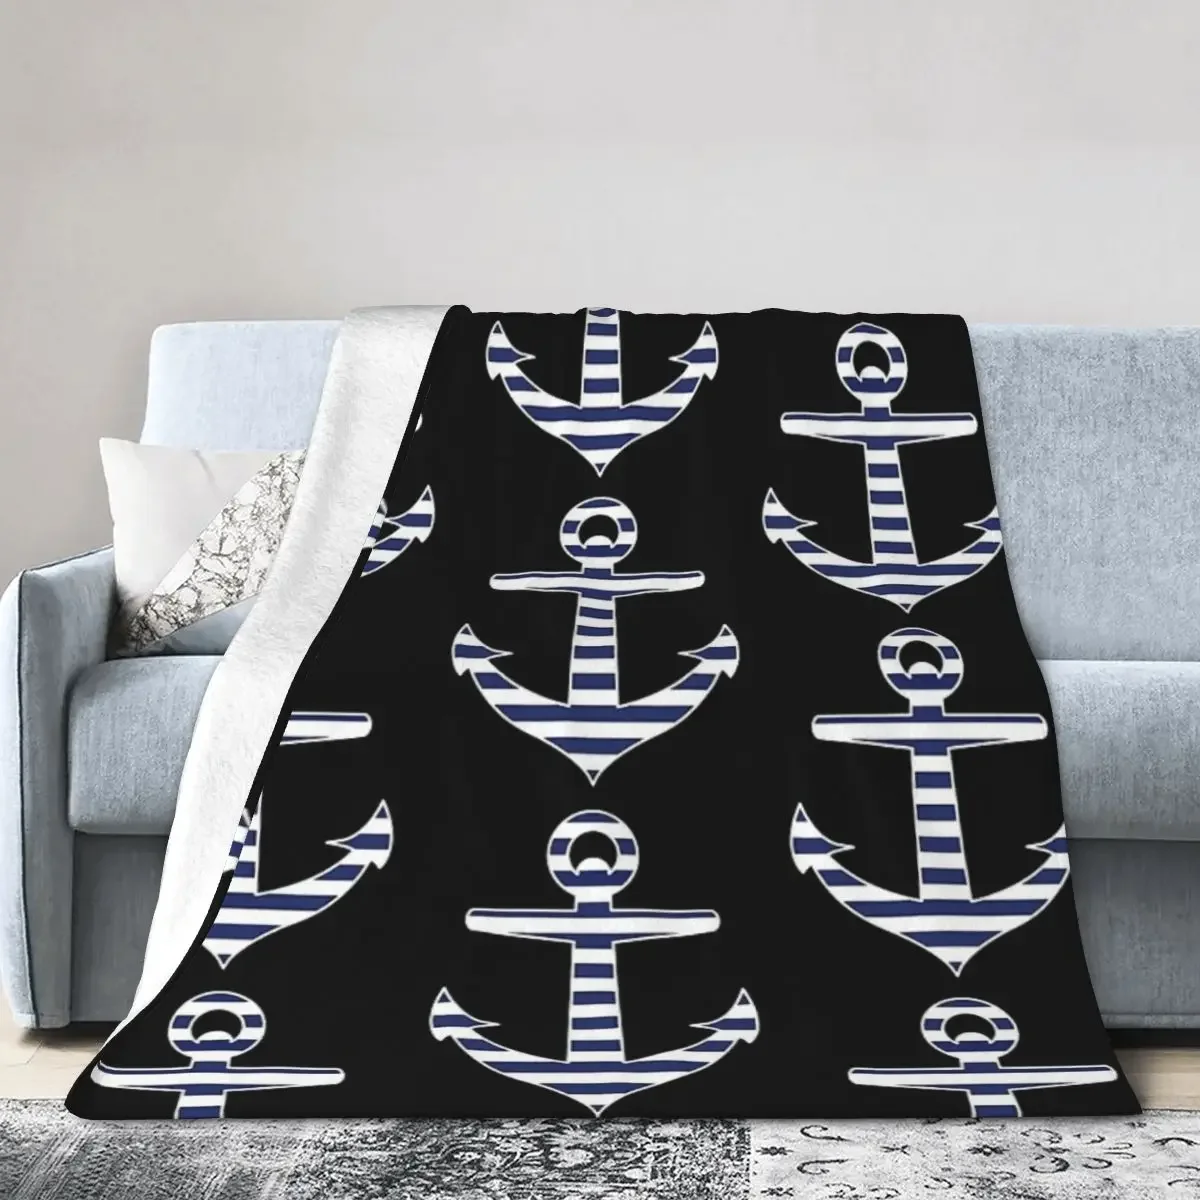 

Horizontal Striped Anchor, Cool Nautical Blankets Soft Warm Flannel Throw Blanket Cover for Bed Living room Picnic Travel Home